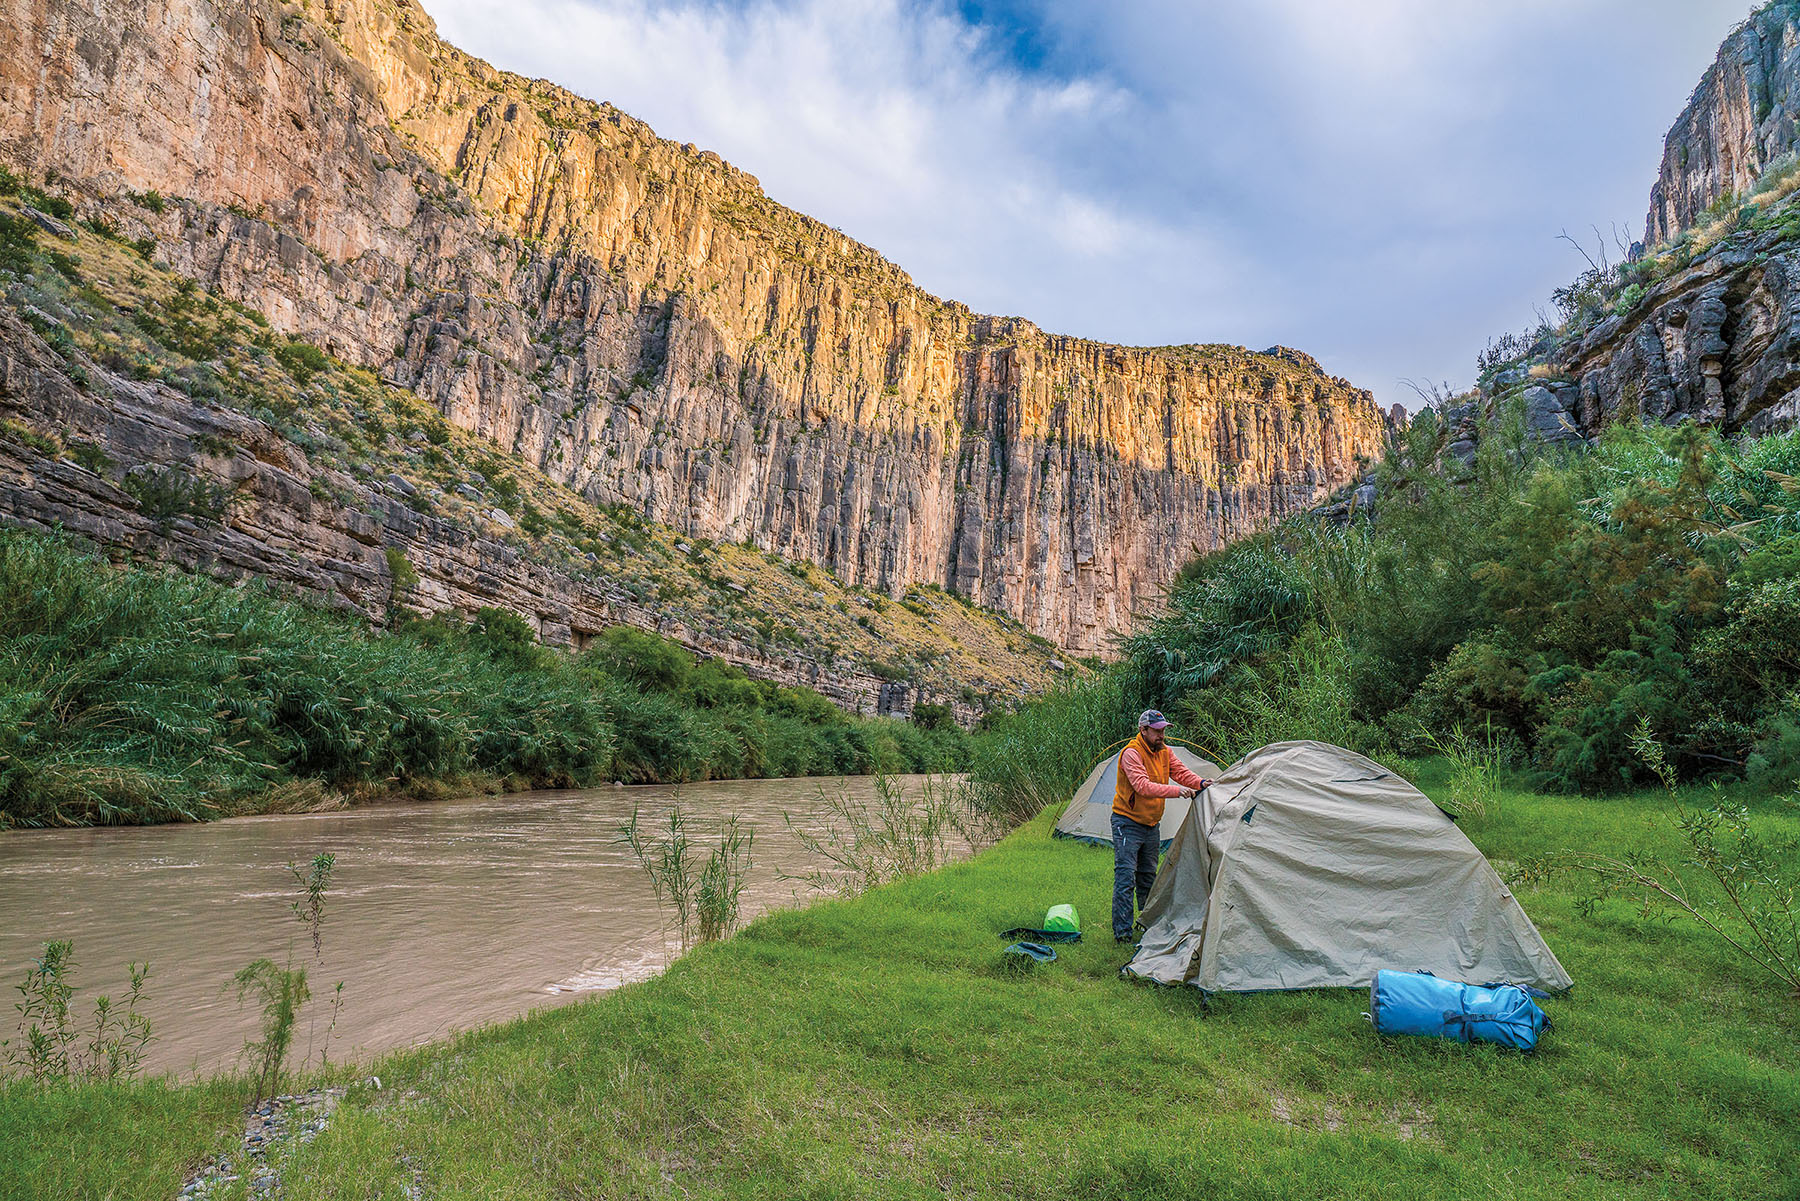 A man pitches a tent along the banks of the Rio Grande